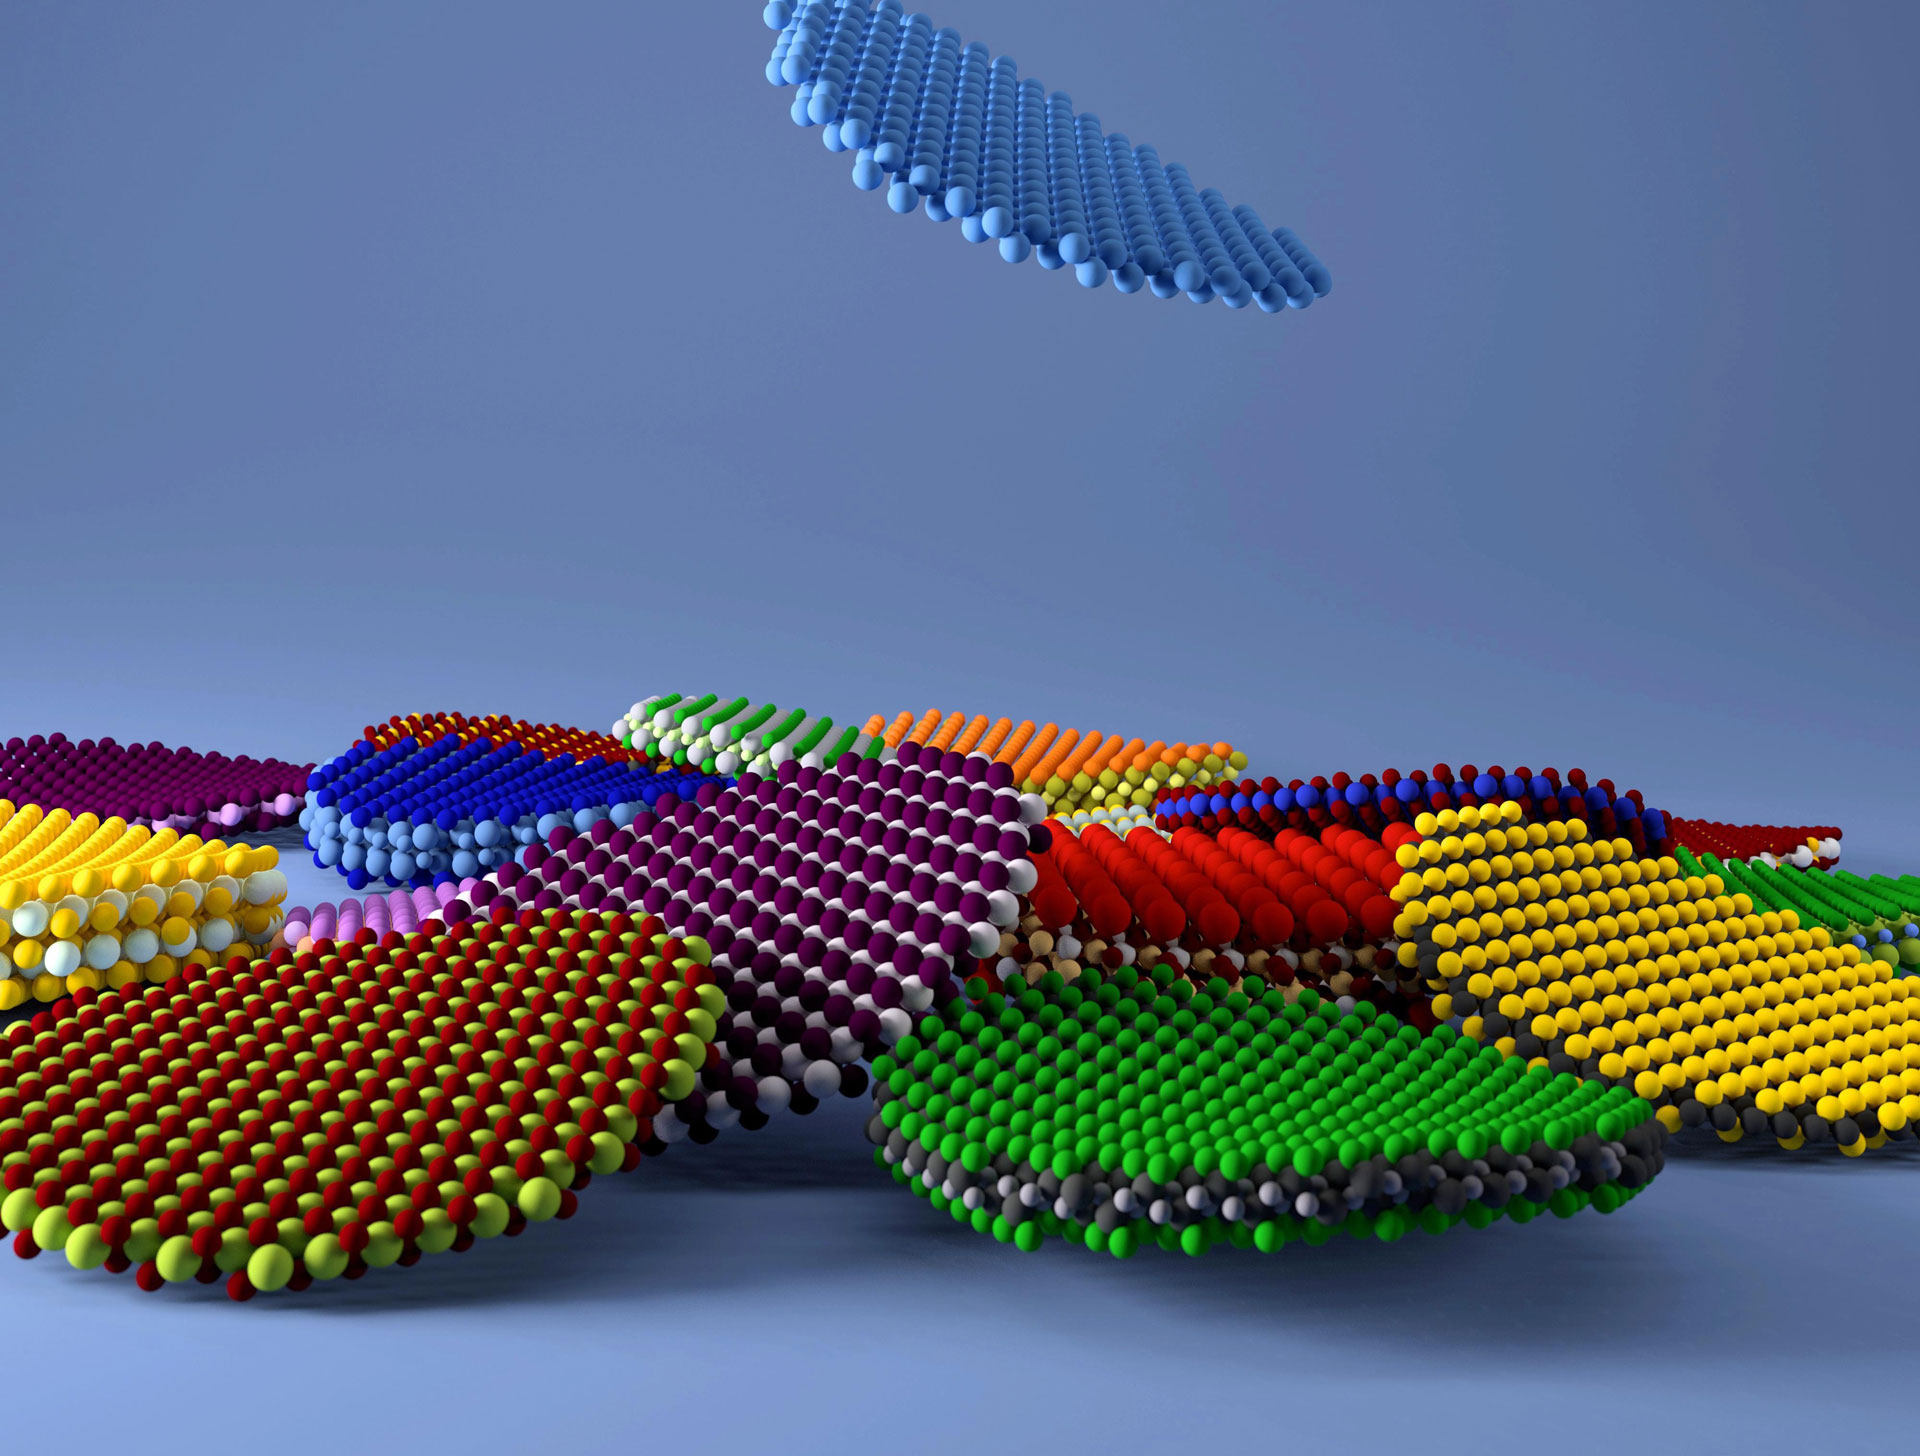 scientists-identify-over-1-000-new-2d-materials-for-nanotech